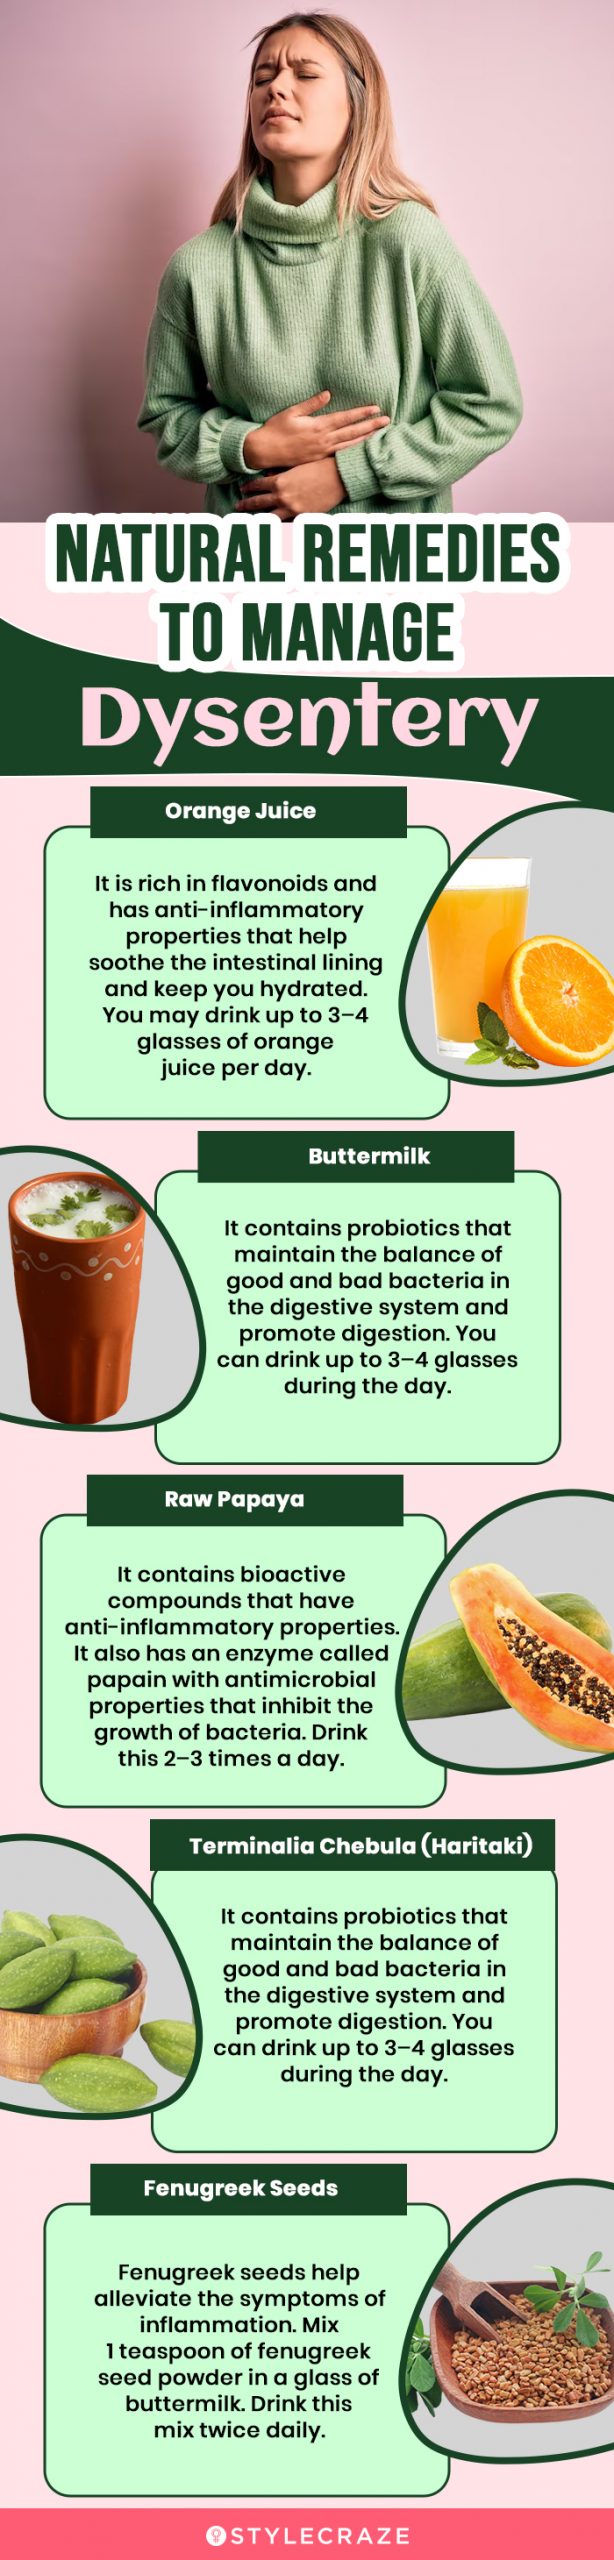 natural remedies to manage dysentery (infographic)